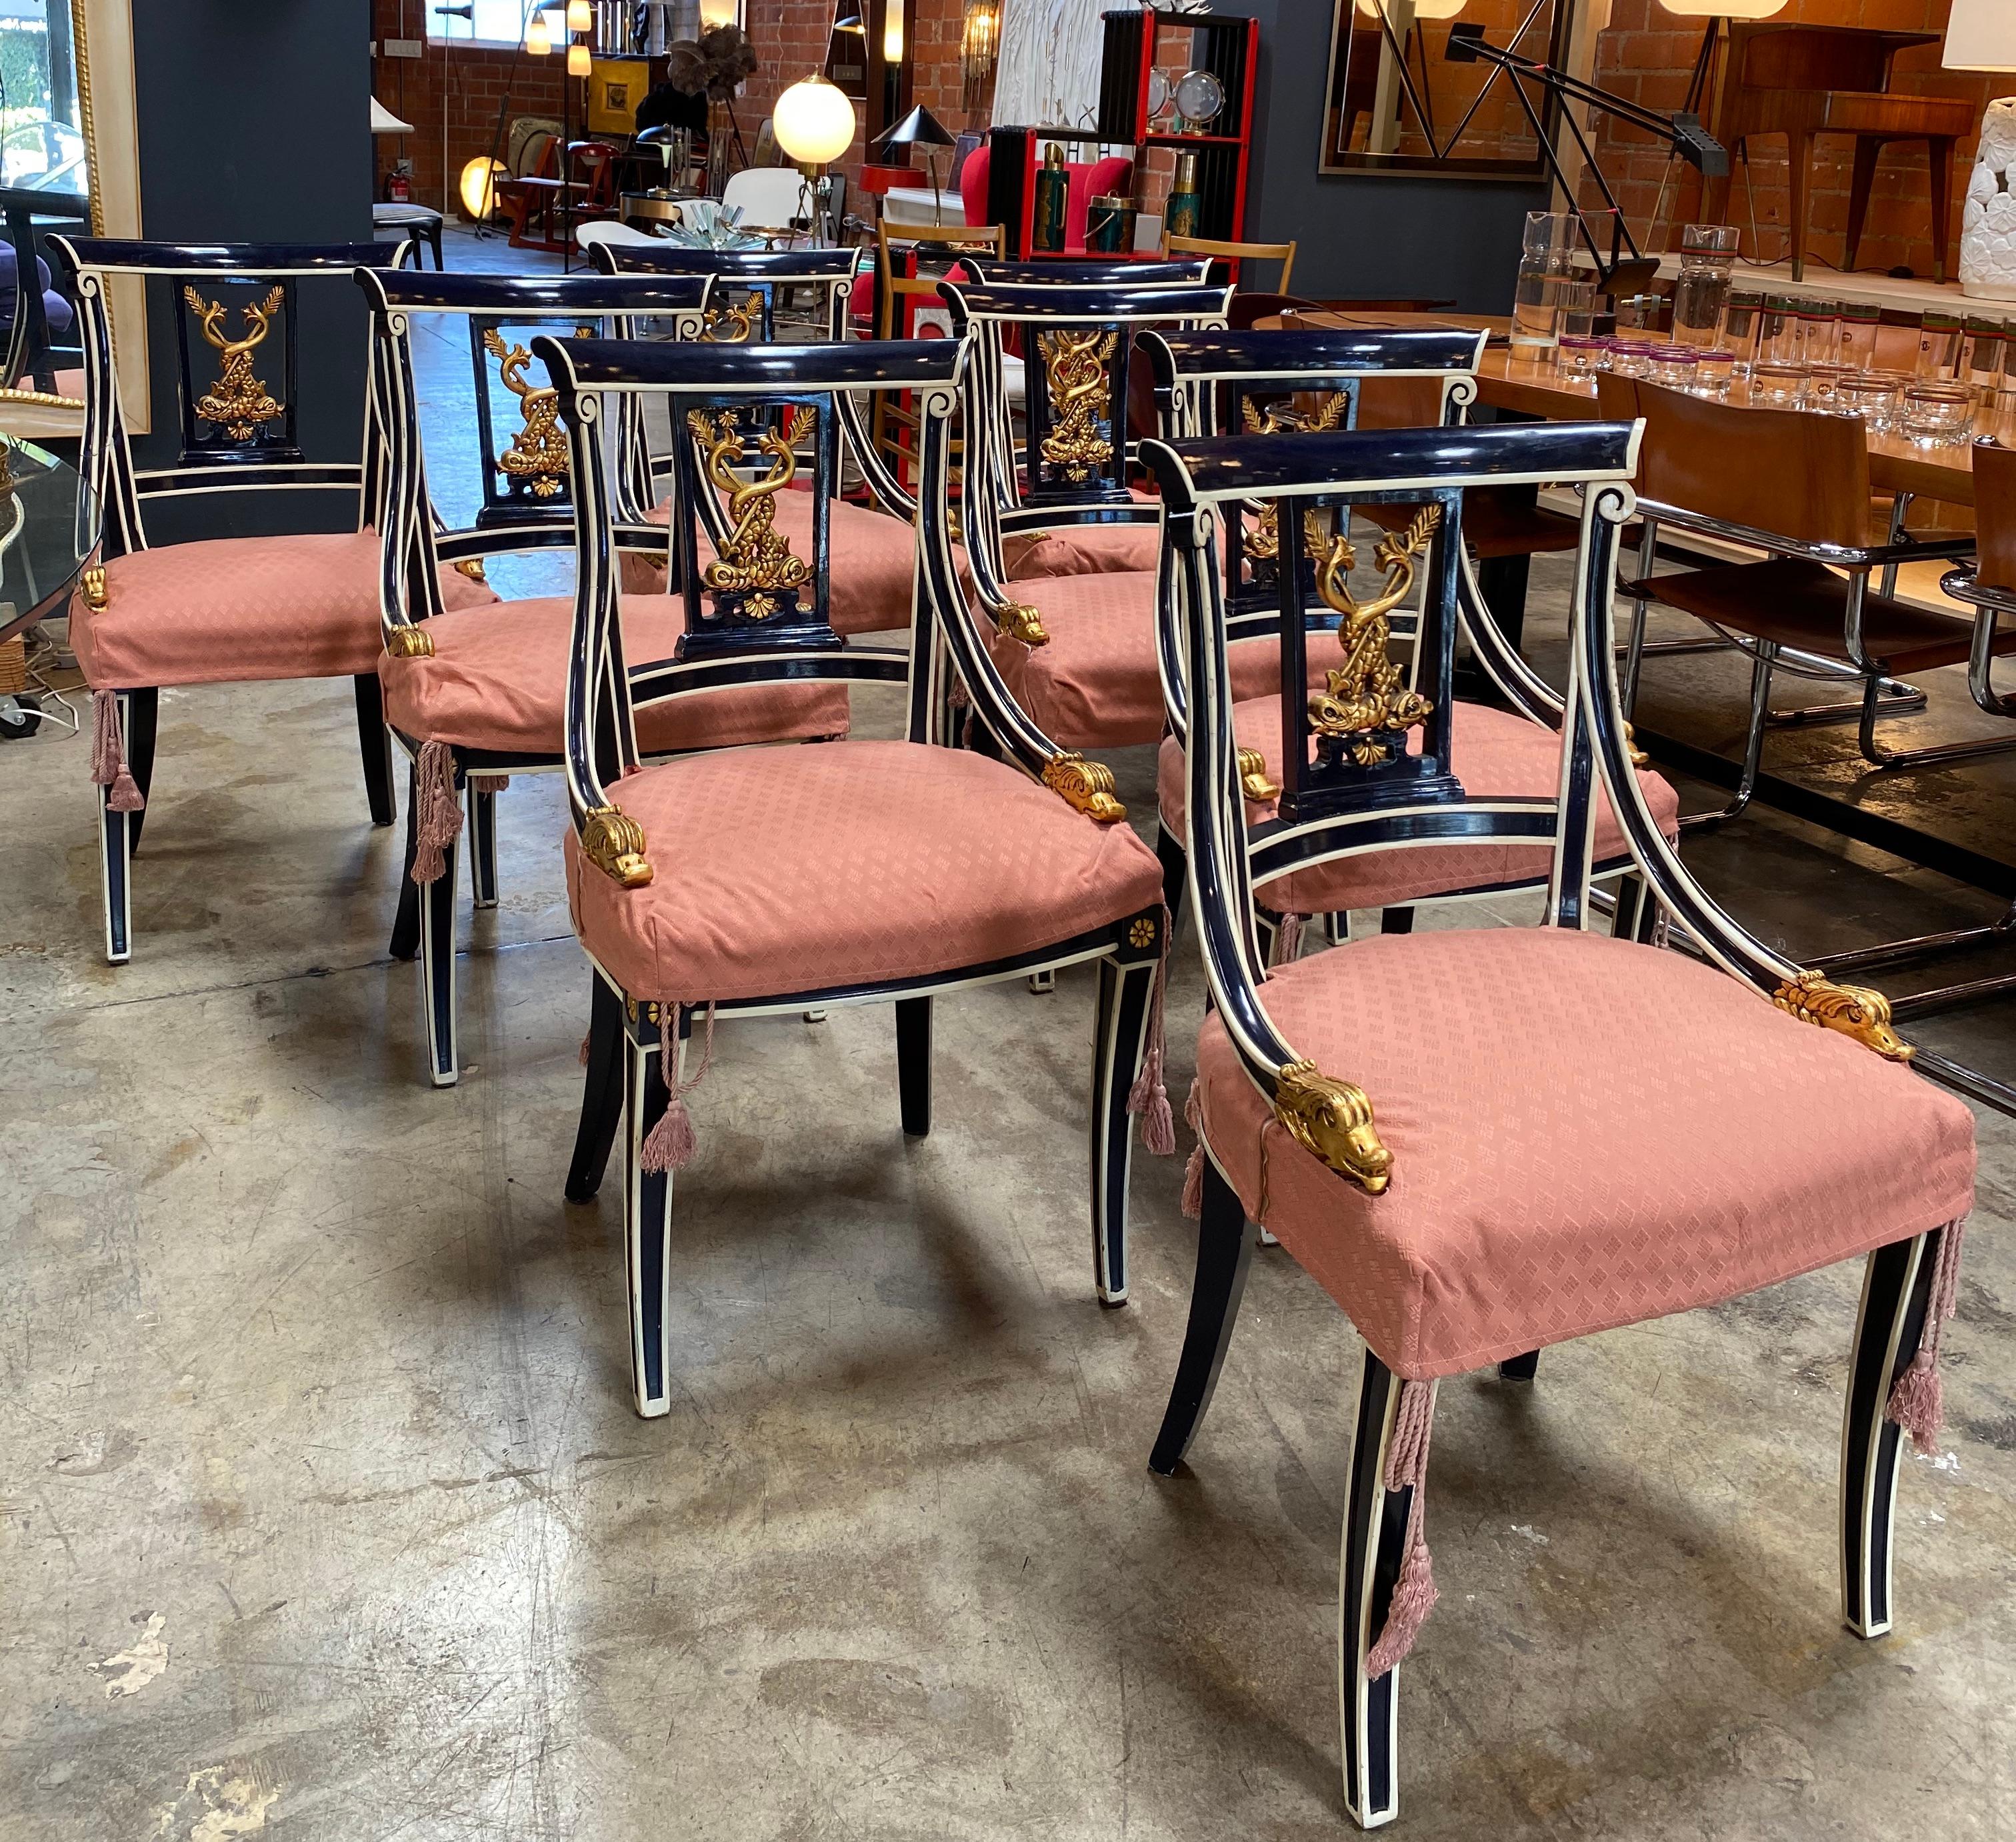 A splendid matched series of eight Venetian chairs dating from the mid-late 19th century. Stunning royal blue lacquered paint and golden water details and design on the chairs, with subtle brush strokes and a magnificent patina. The color is just